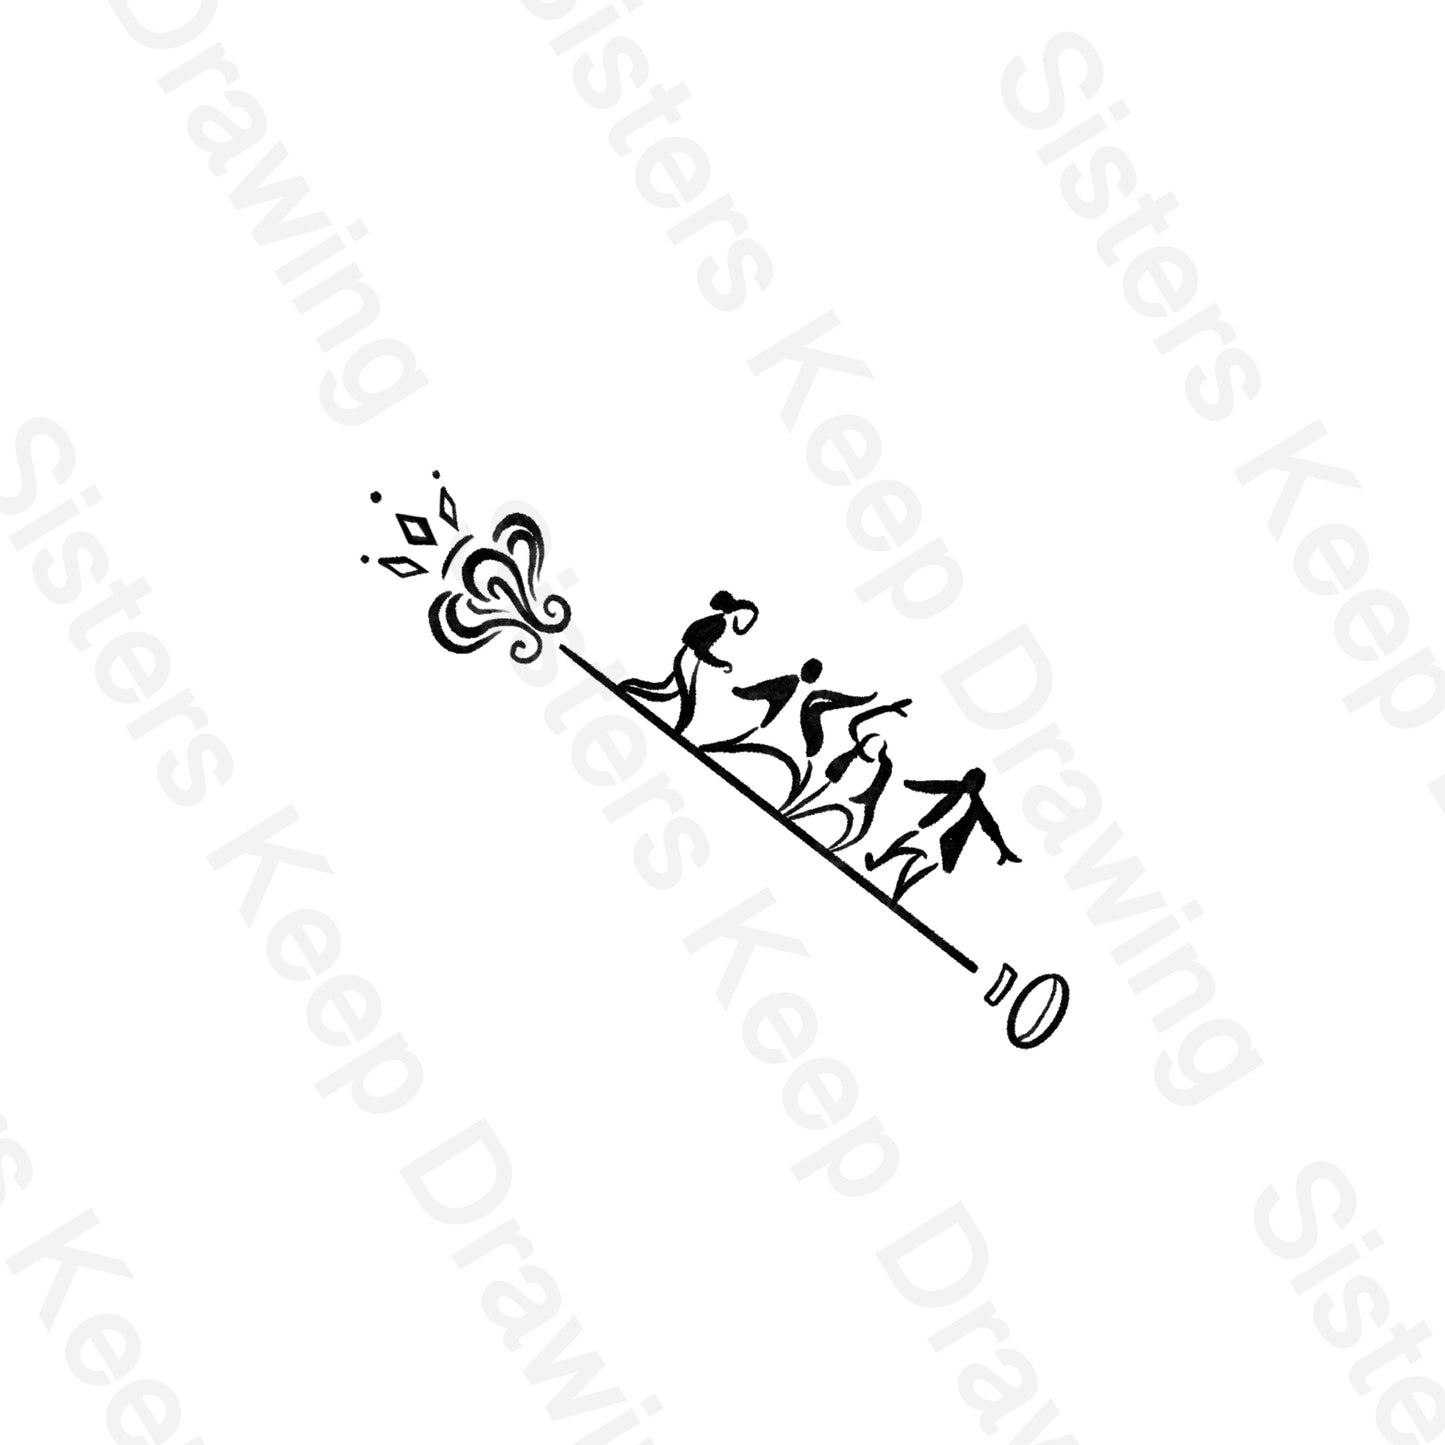 Hamilton dancing on scepter Tattoo Transparent PNG